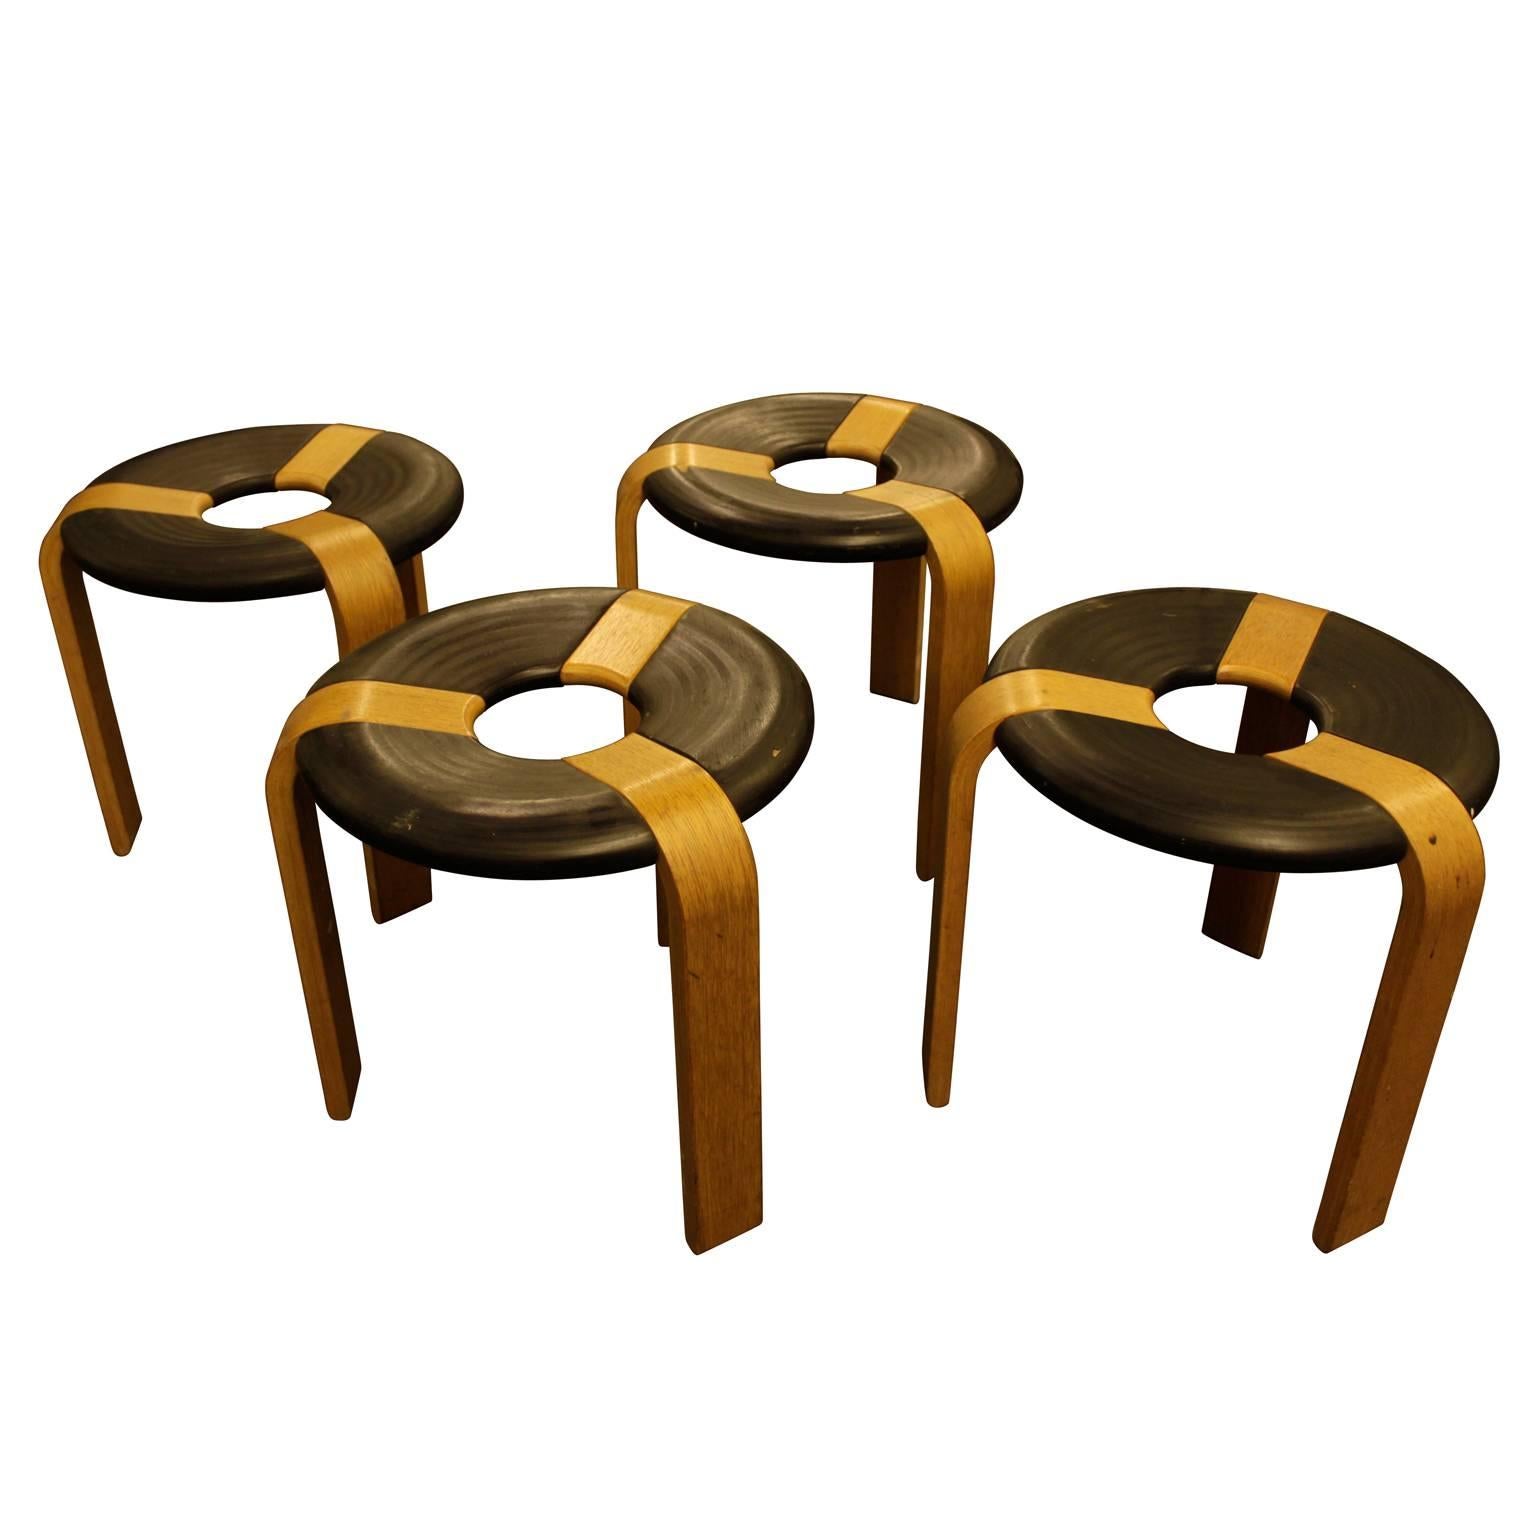 These three-legged, wooden stools, feature unique 